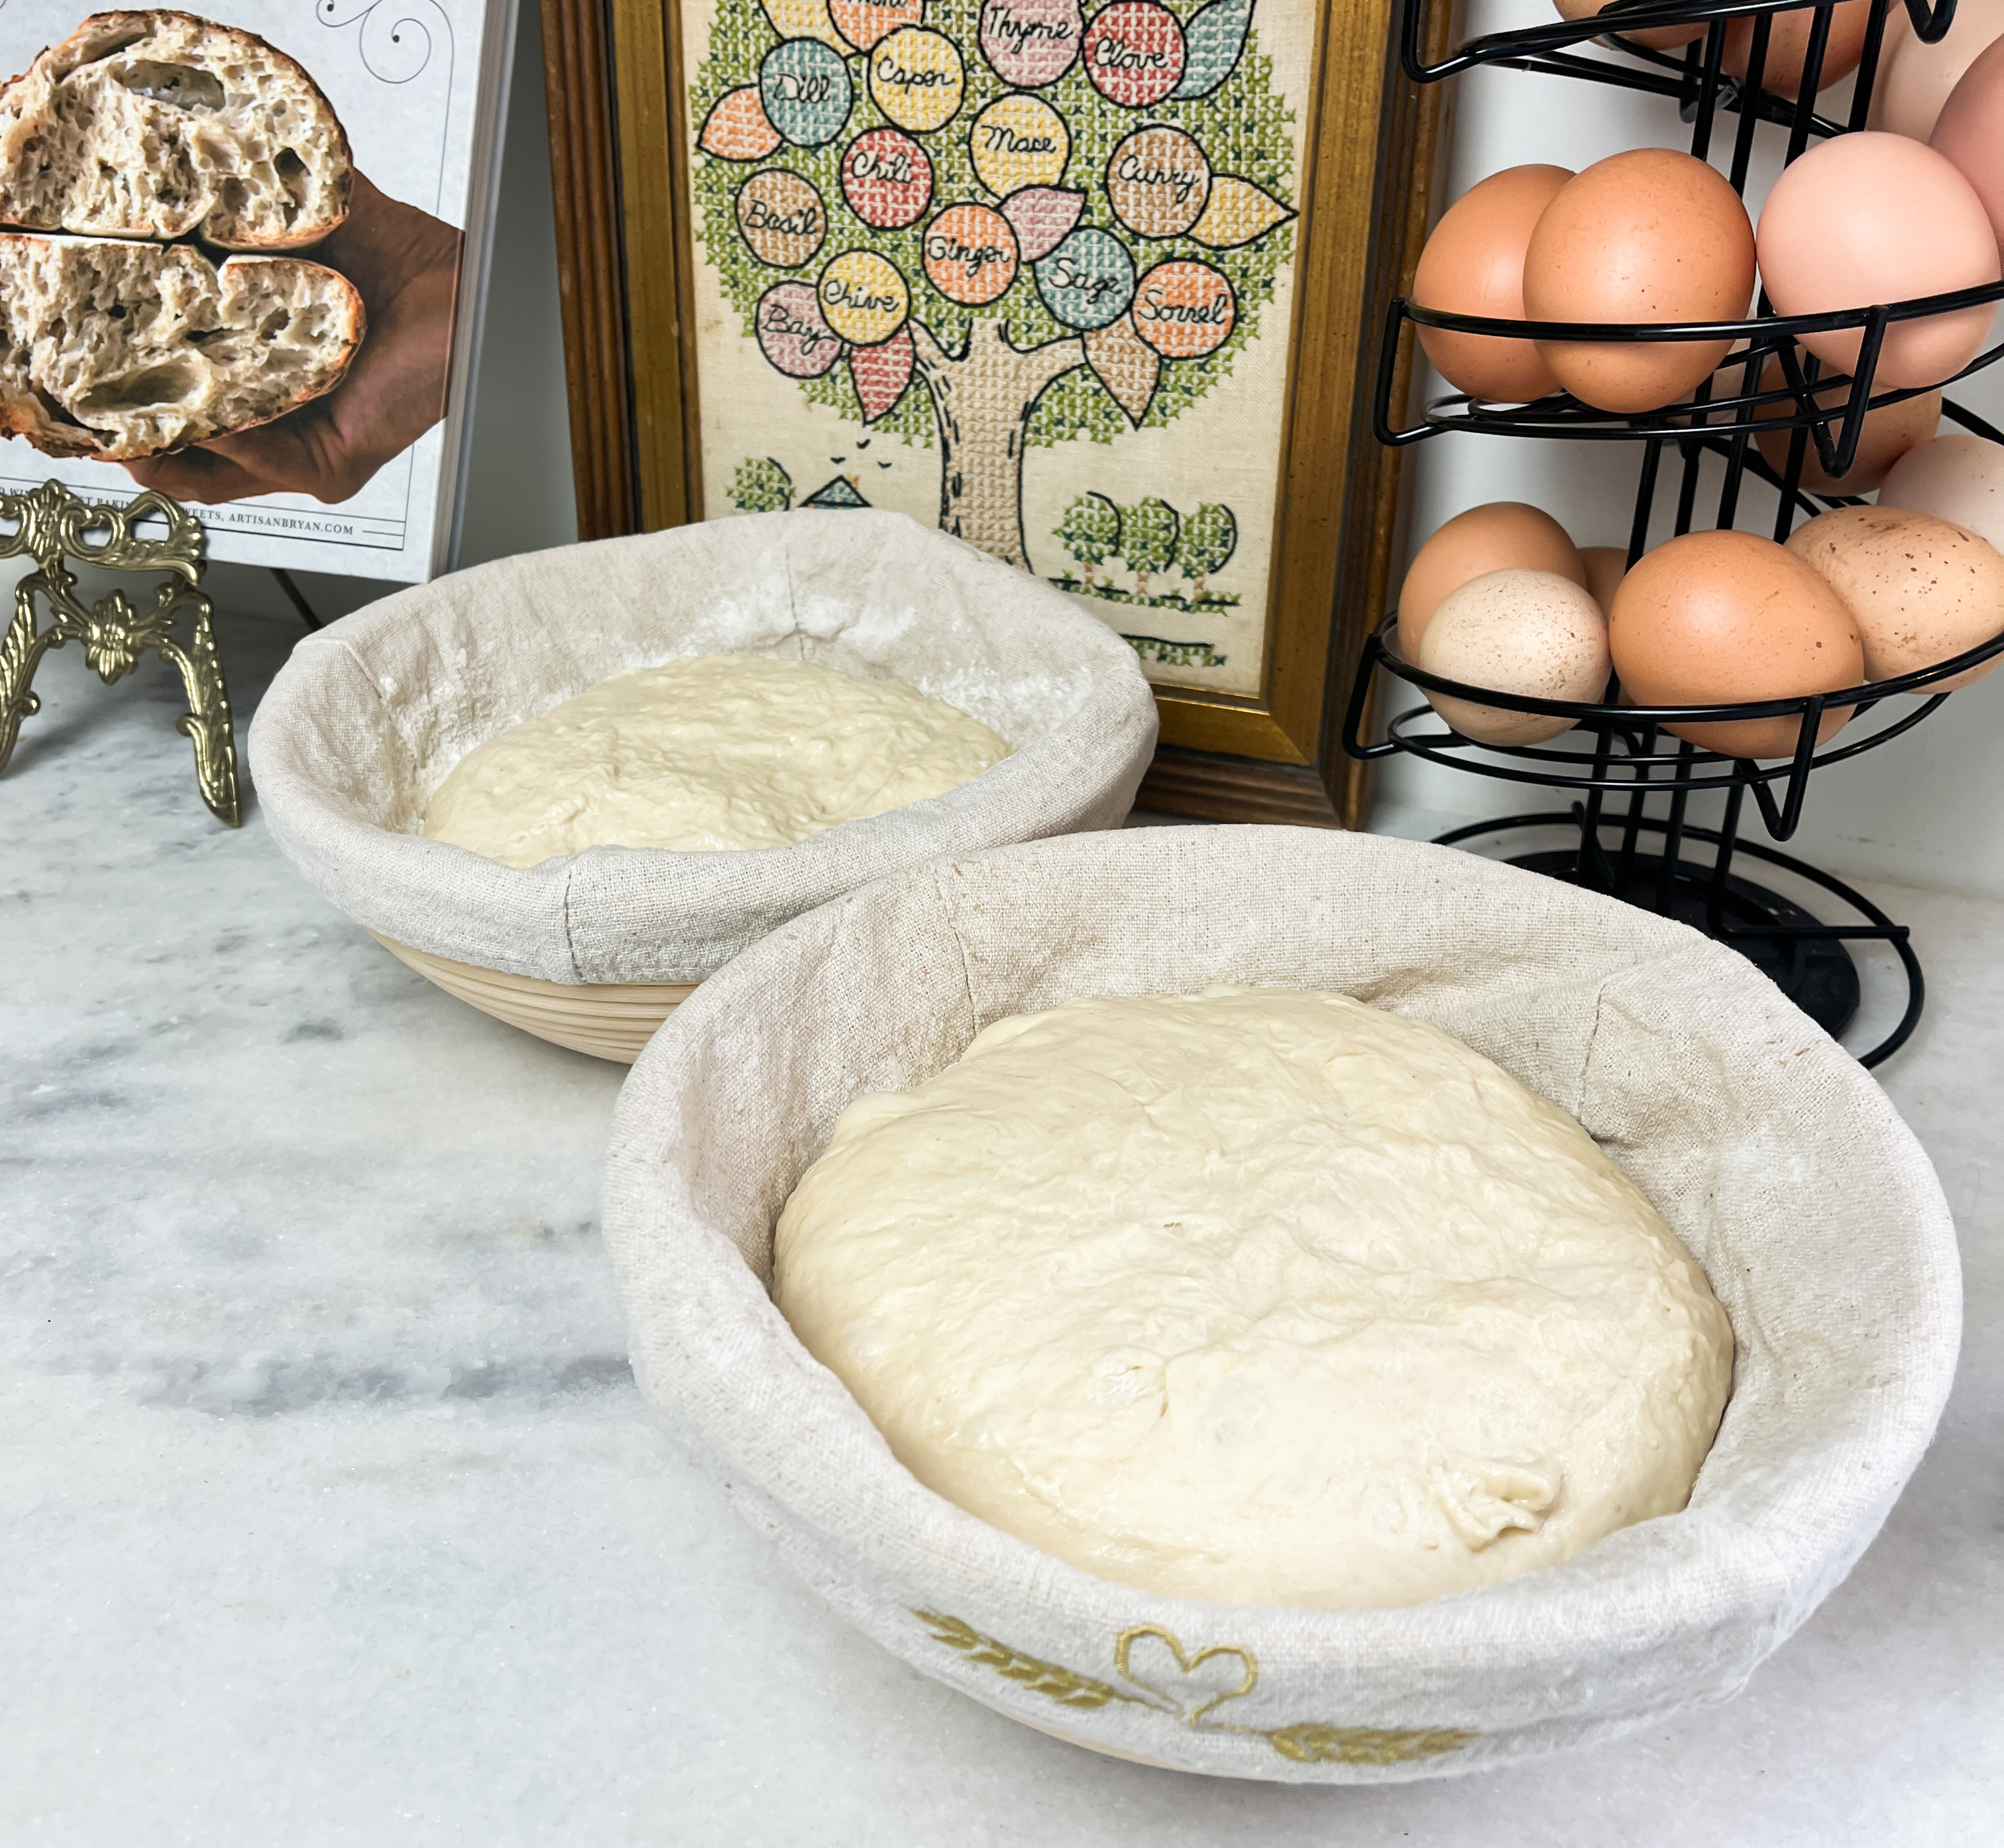 two cloth lined bowls with dough inside sitting on a marble countertop with brown eggs and a picture